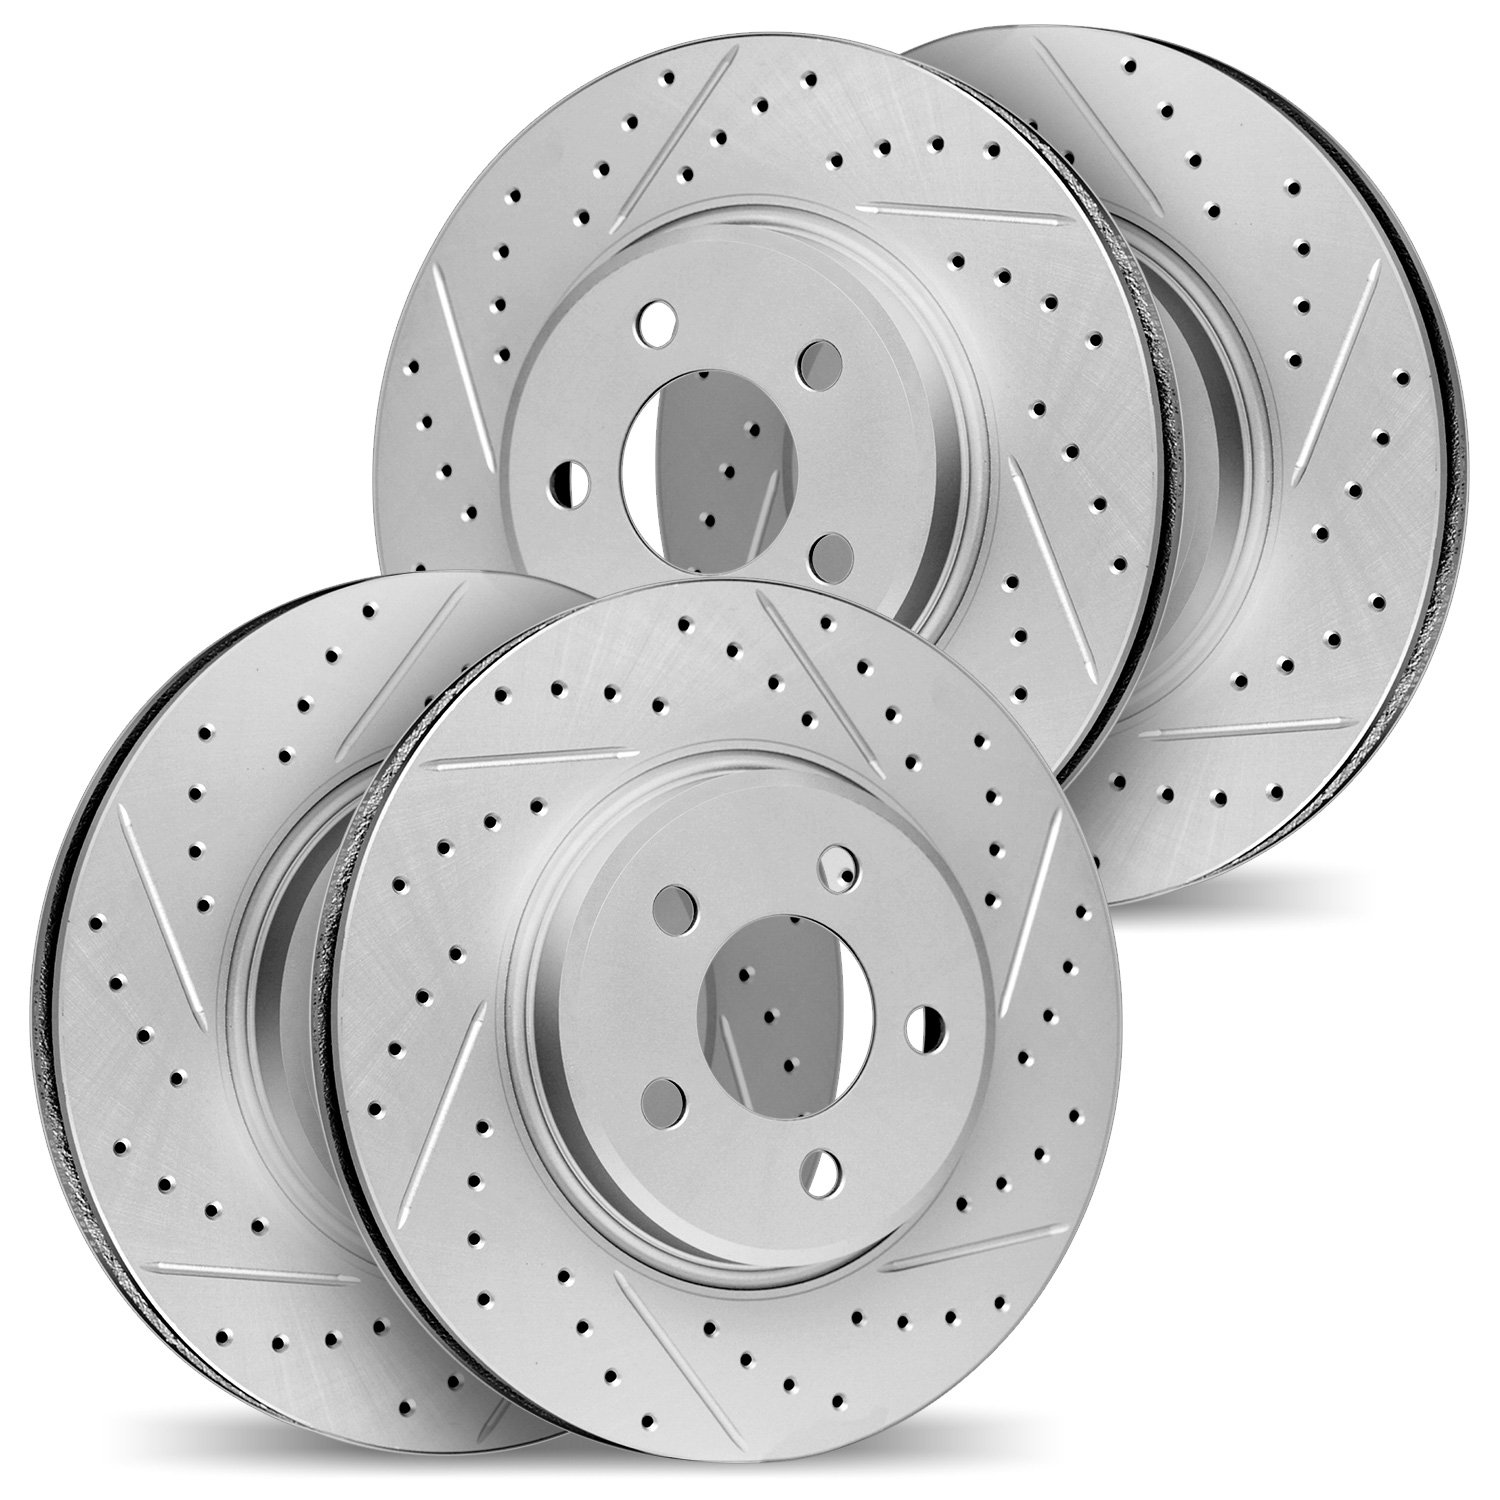 2004-31018 Geoperformance Drilled/Slotted Brake Rotors, 2006-2007 BMW, Position: Front and Rear